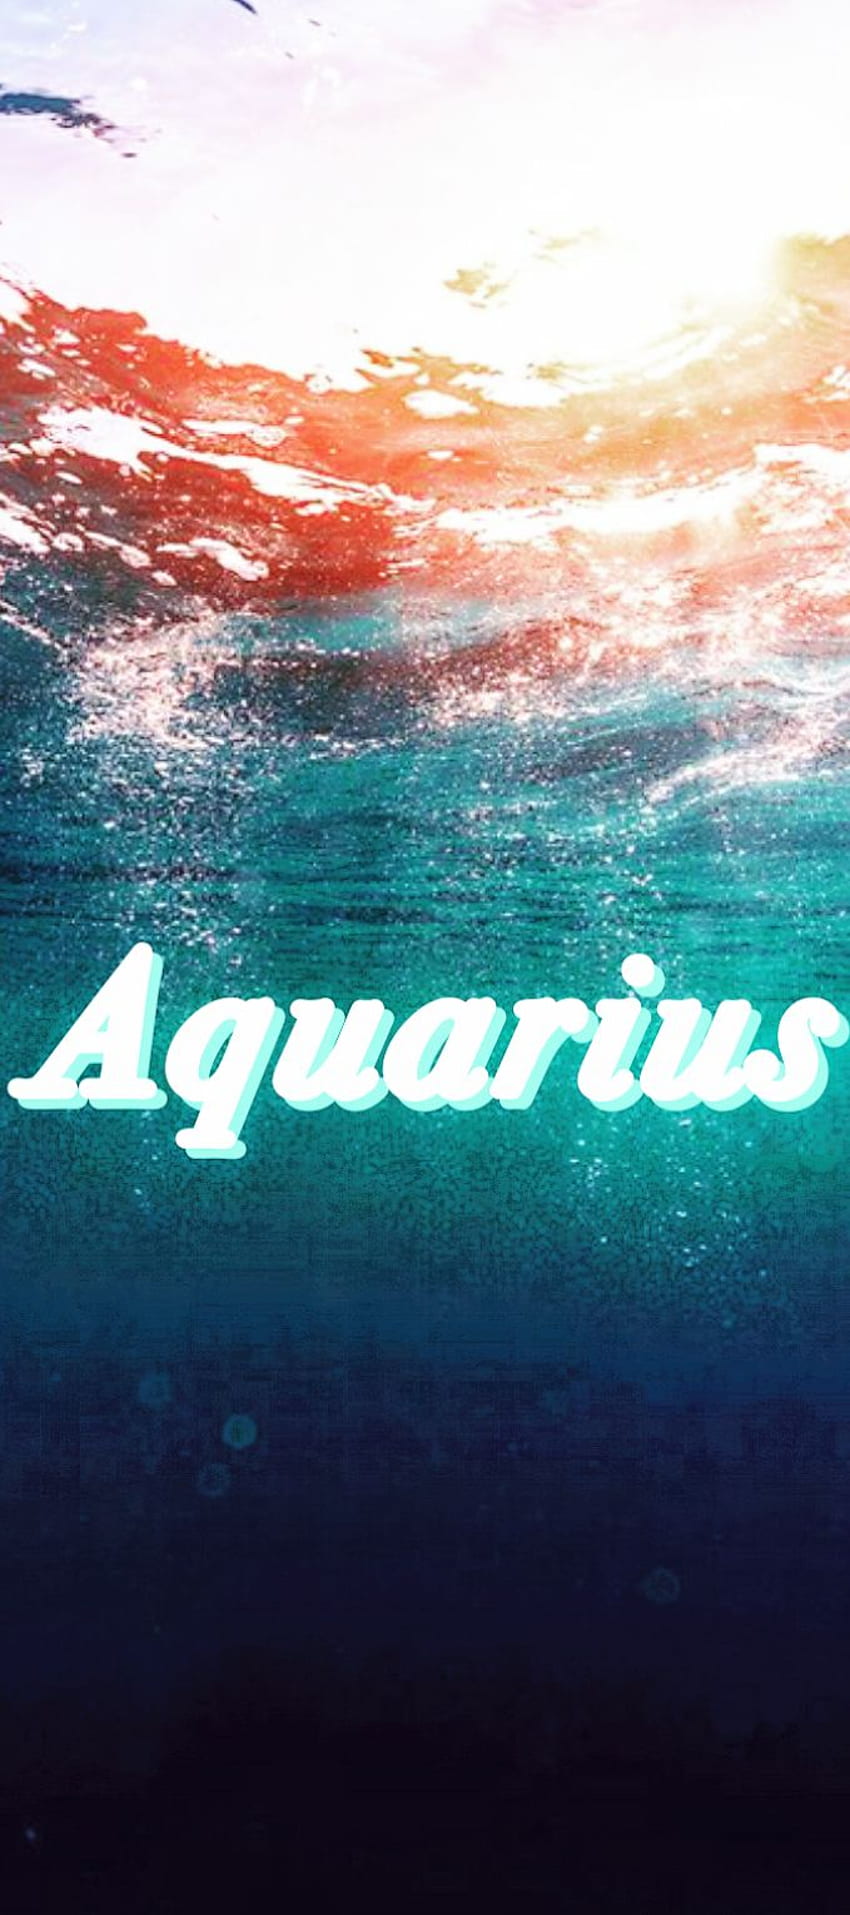 Aquarius wallpaper, drawn in white, on a blue and turquoise background, with water and sun in the background - Aquarius